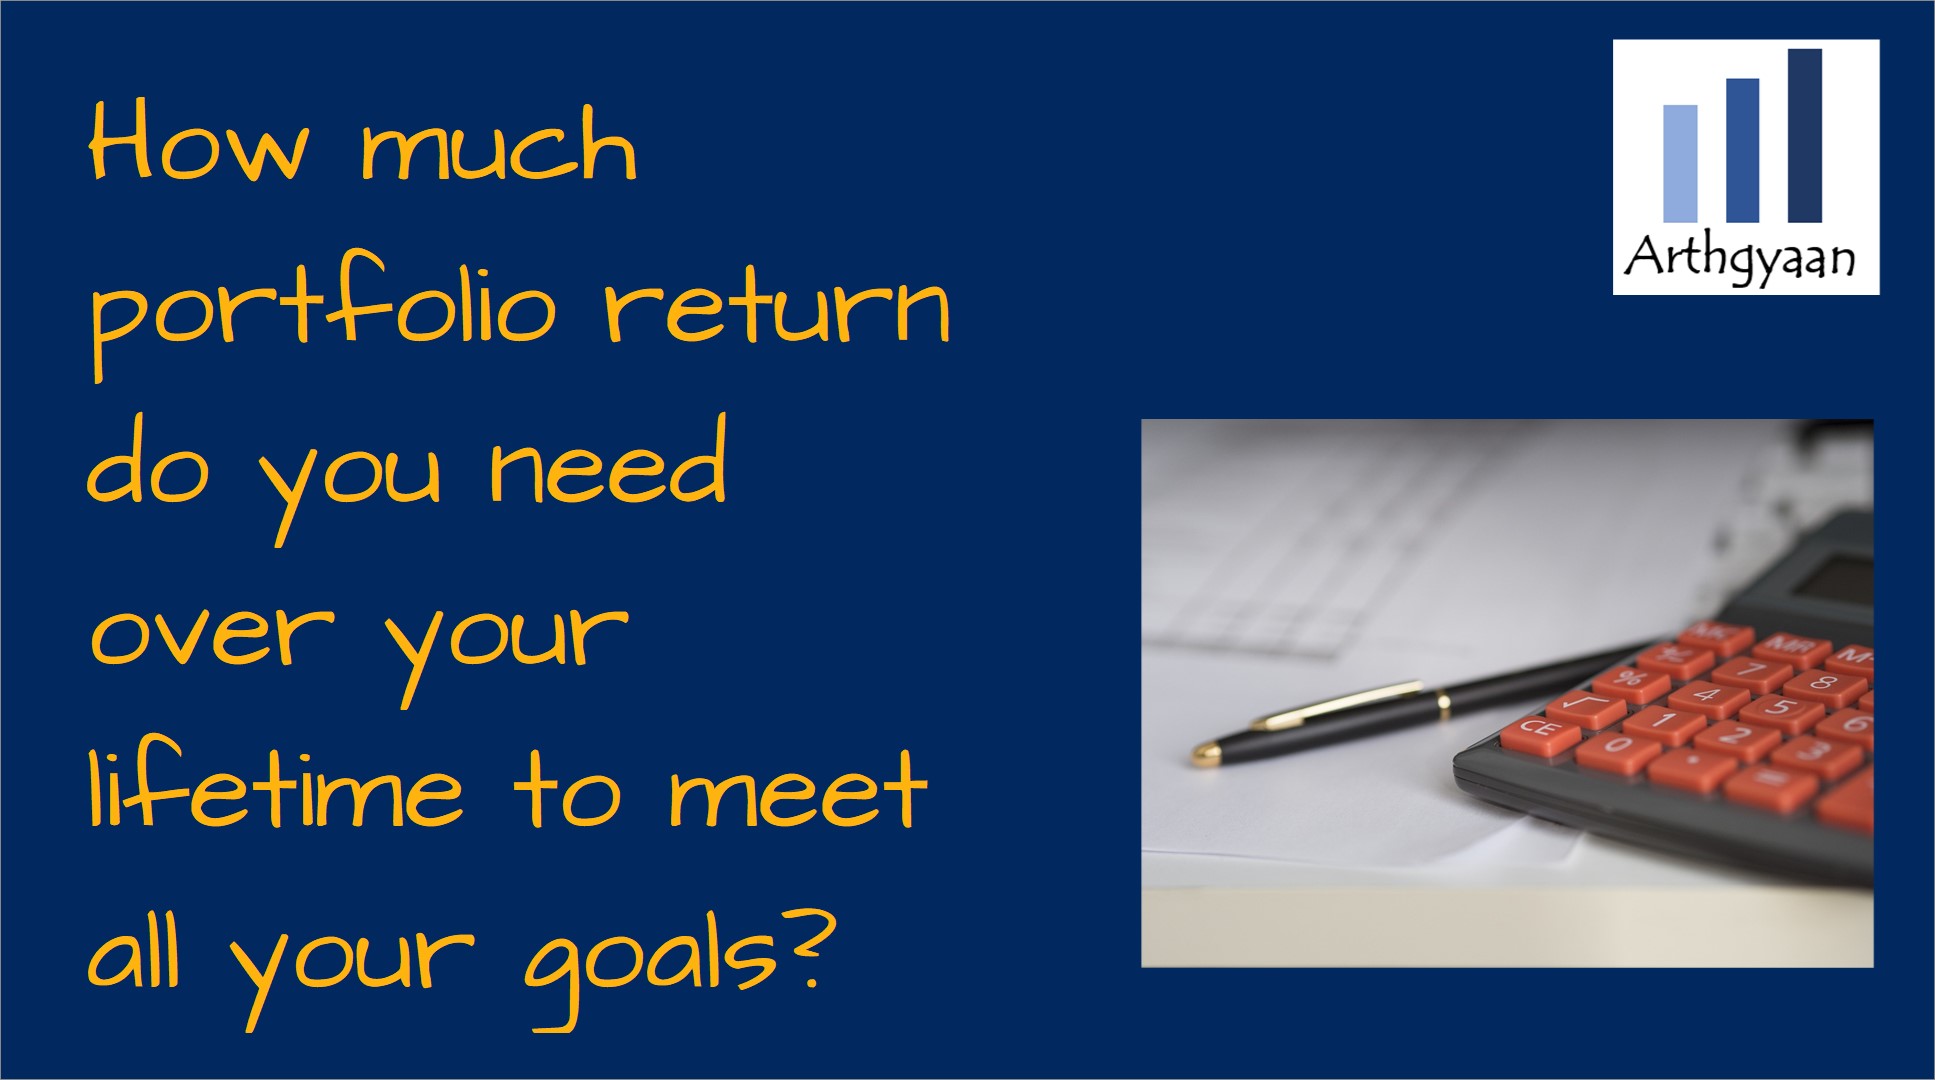 How much portfolio return do you need over your lifetime to meet all your goals?